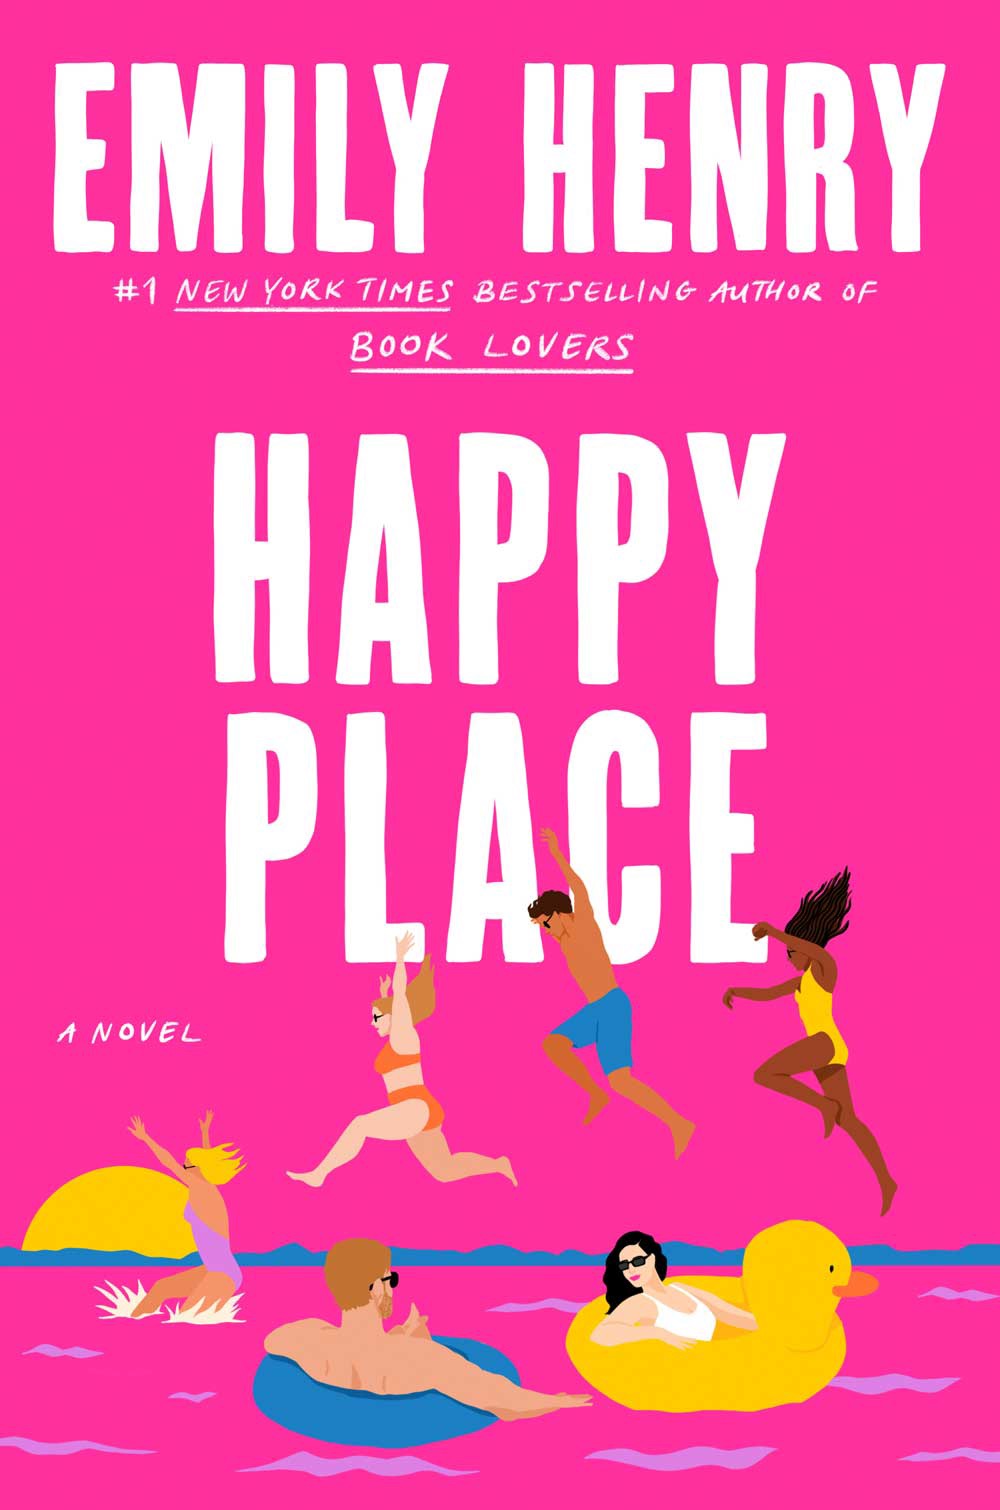 Book cover of Happy Place. Illustration of people in swimsuits jumping into the water, while some are in pool floats, at the beach.